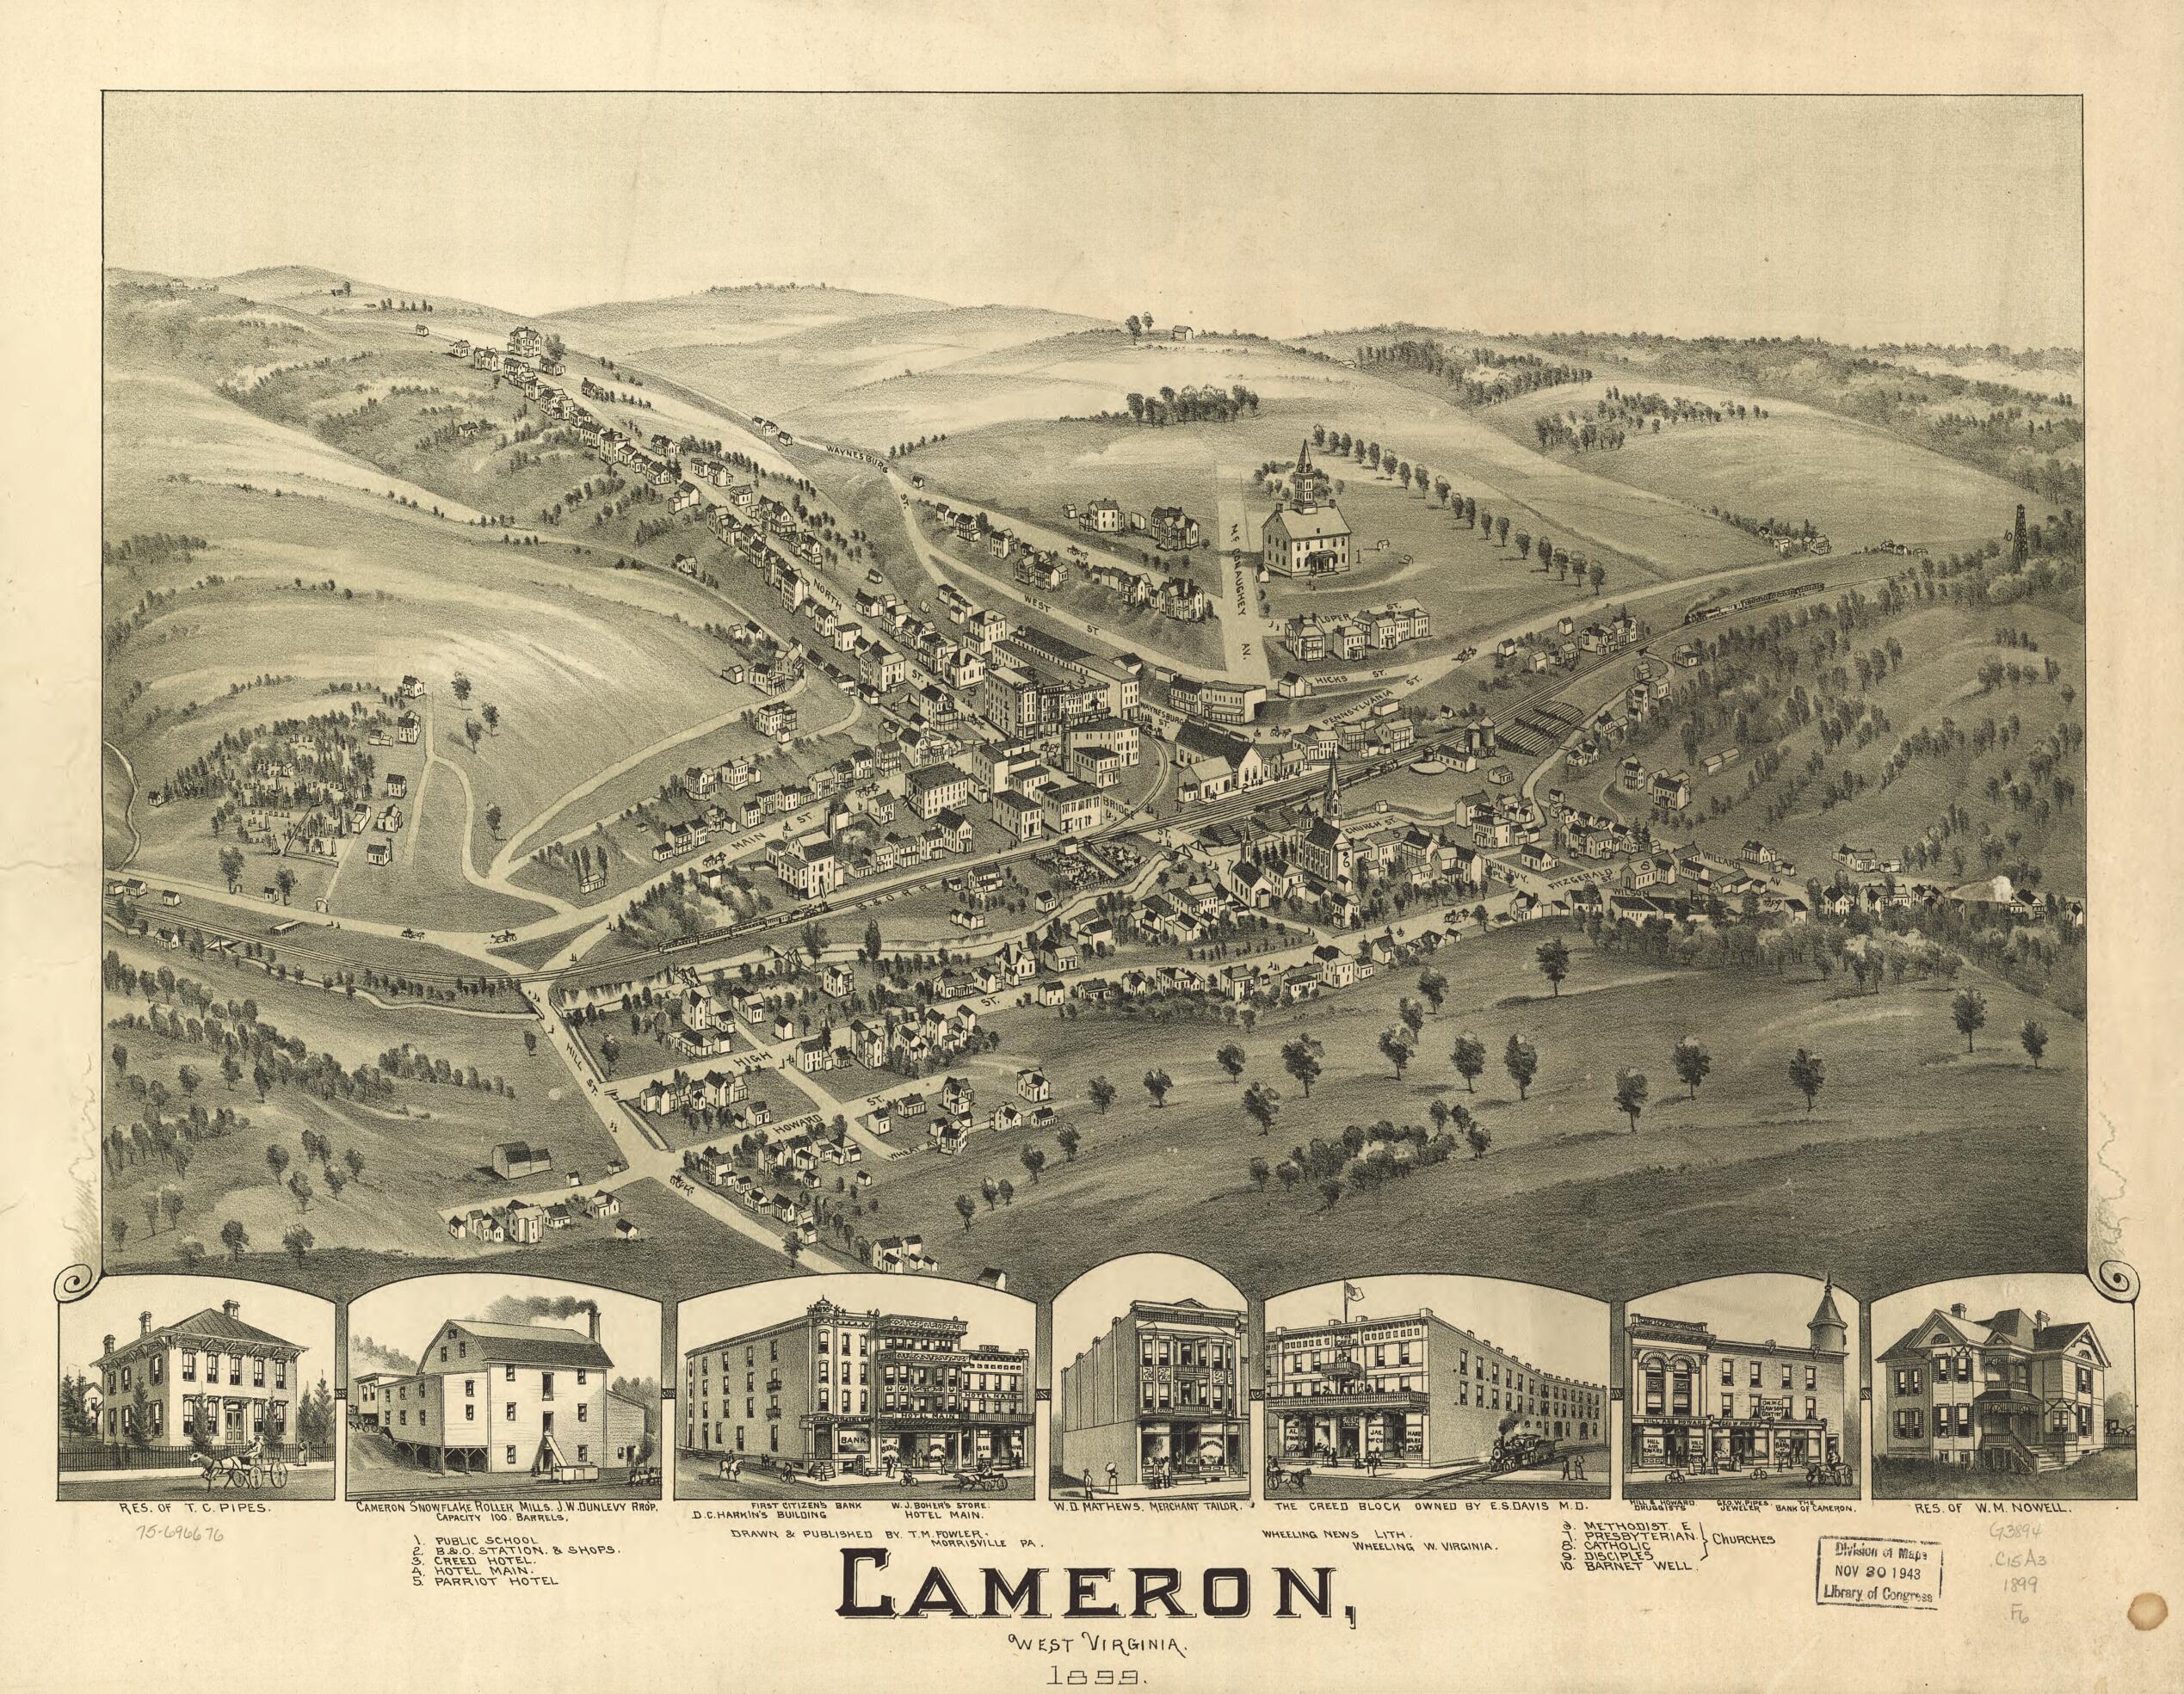 This old map of Cameron, West Virginia from 1899 was created by T. M. (Thaddeus Mortimer) Fowler,  Wheeling News Lith in 1899